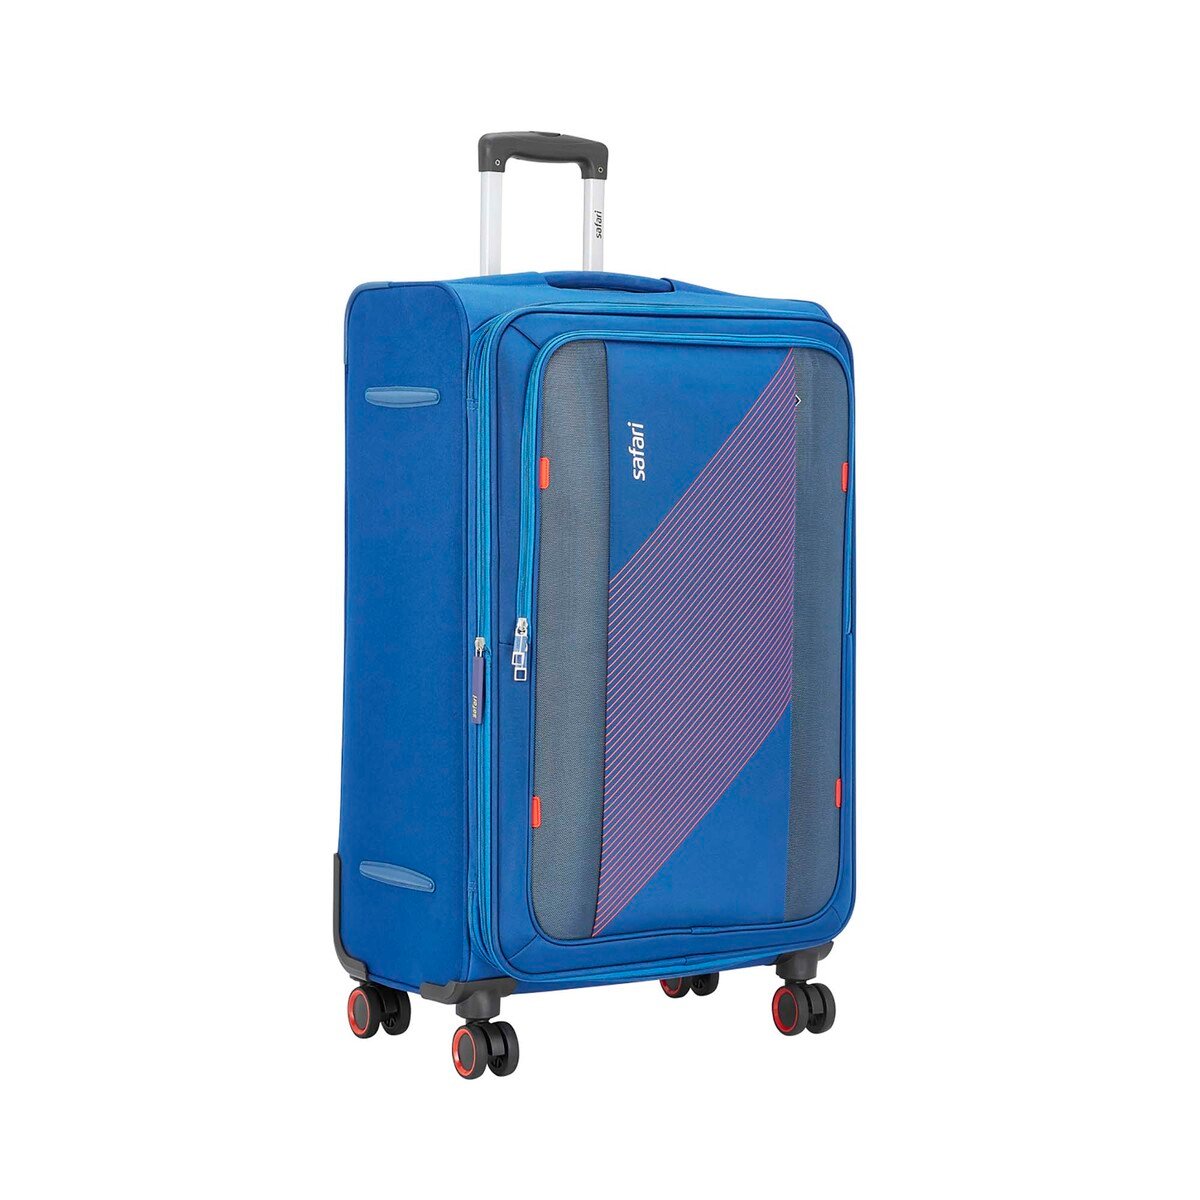 Safari Red Greater Medium Trolley Bag Price in India, Full Specifications &  Offers | DTashion.com